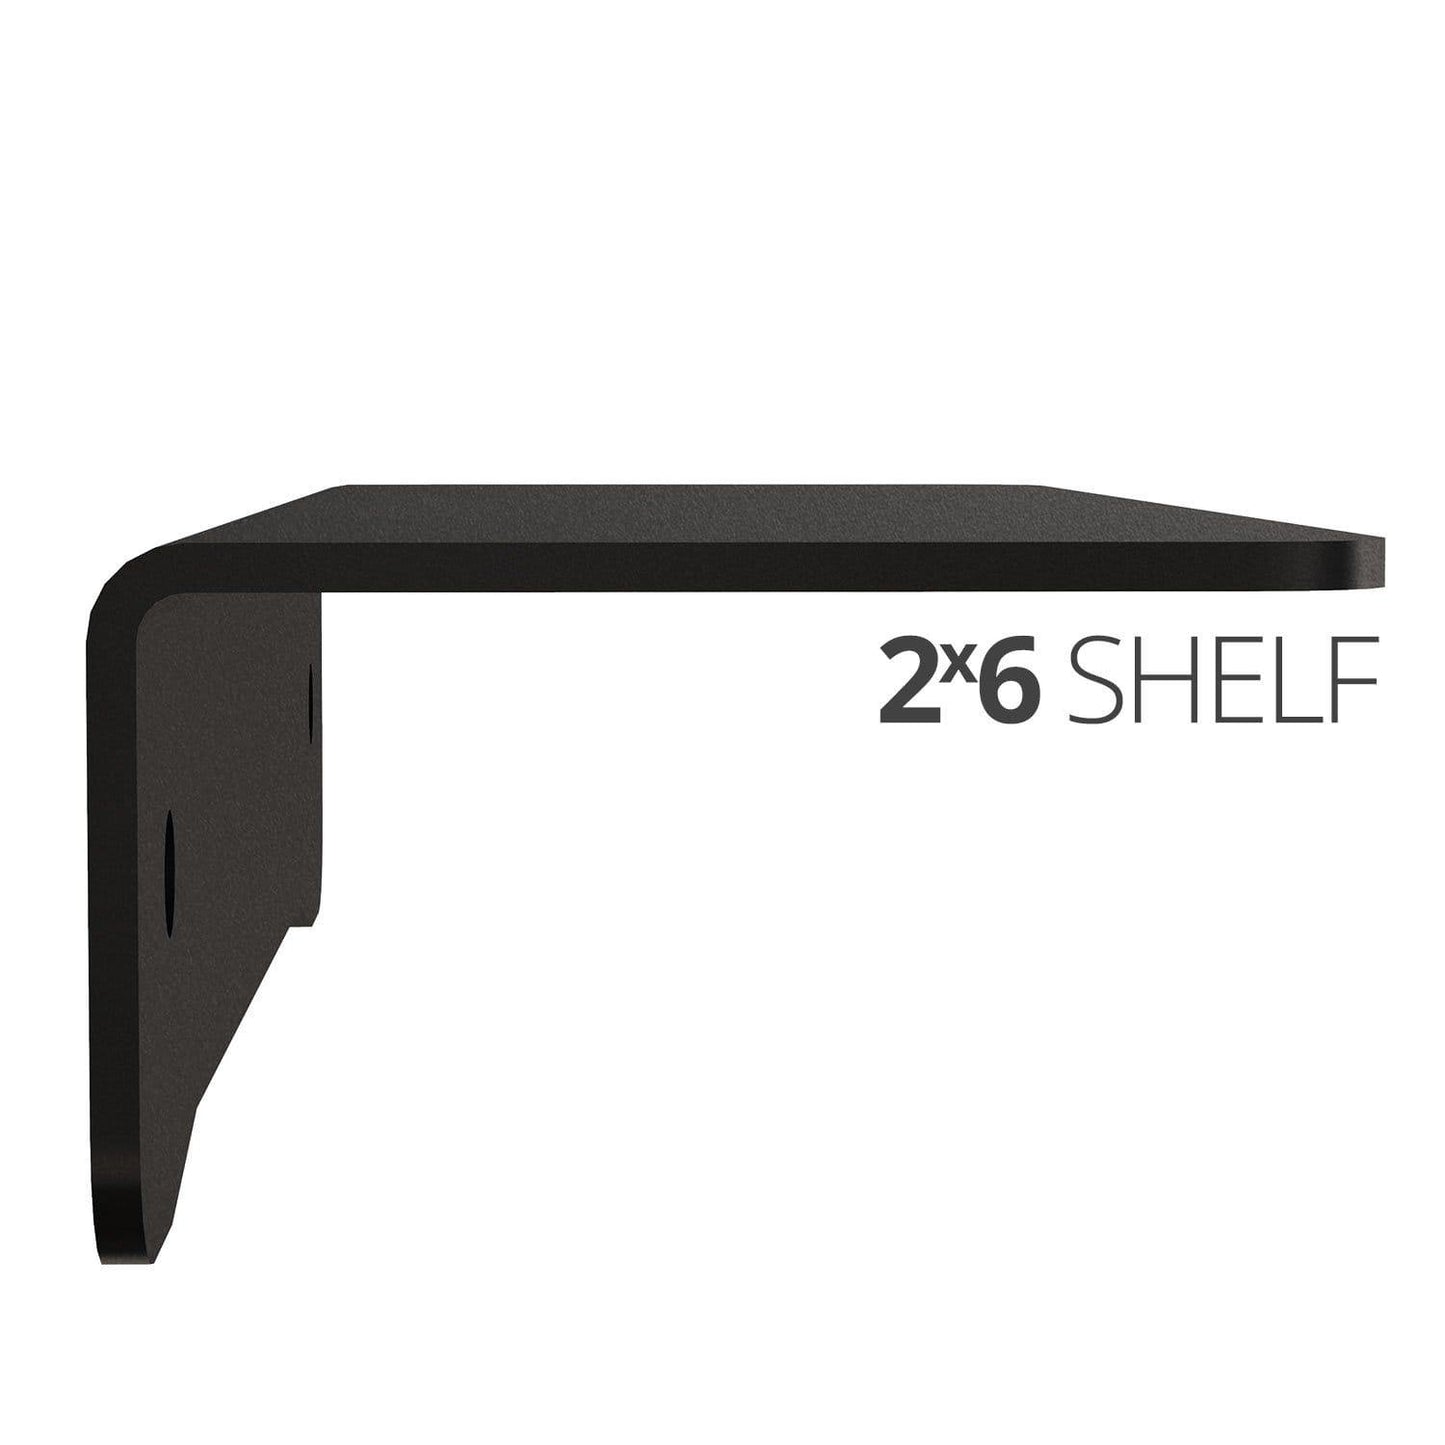 Small wall mounted shelves for home, office and garage - 2x6 side